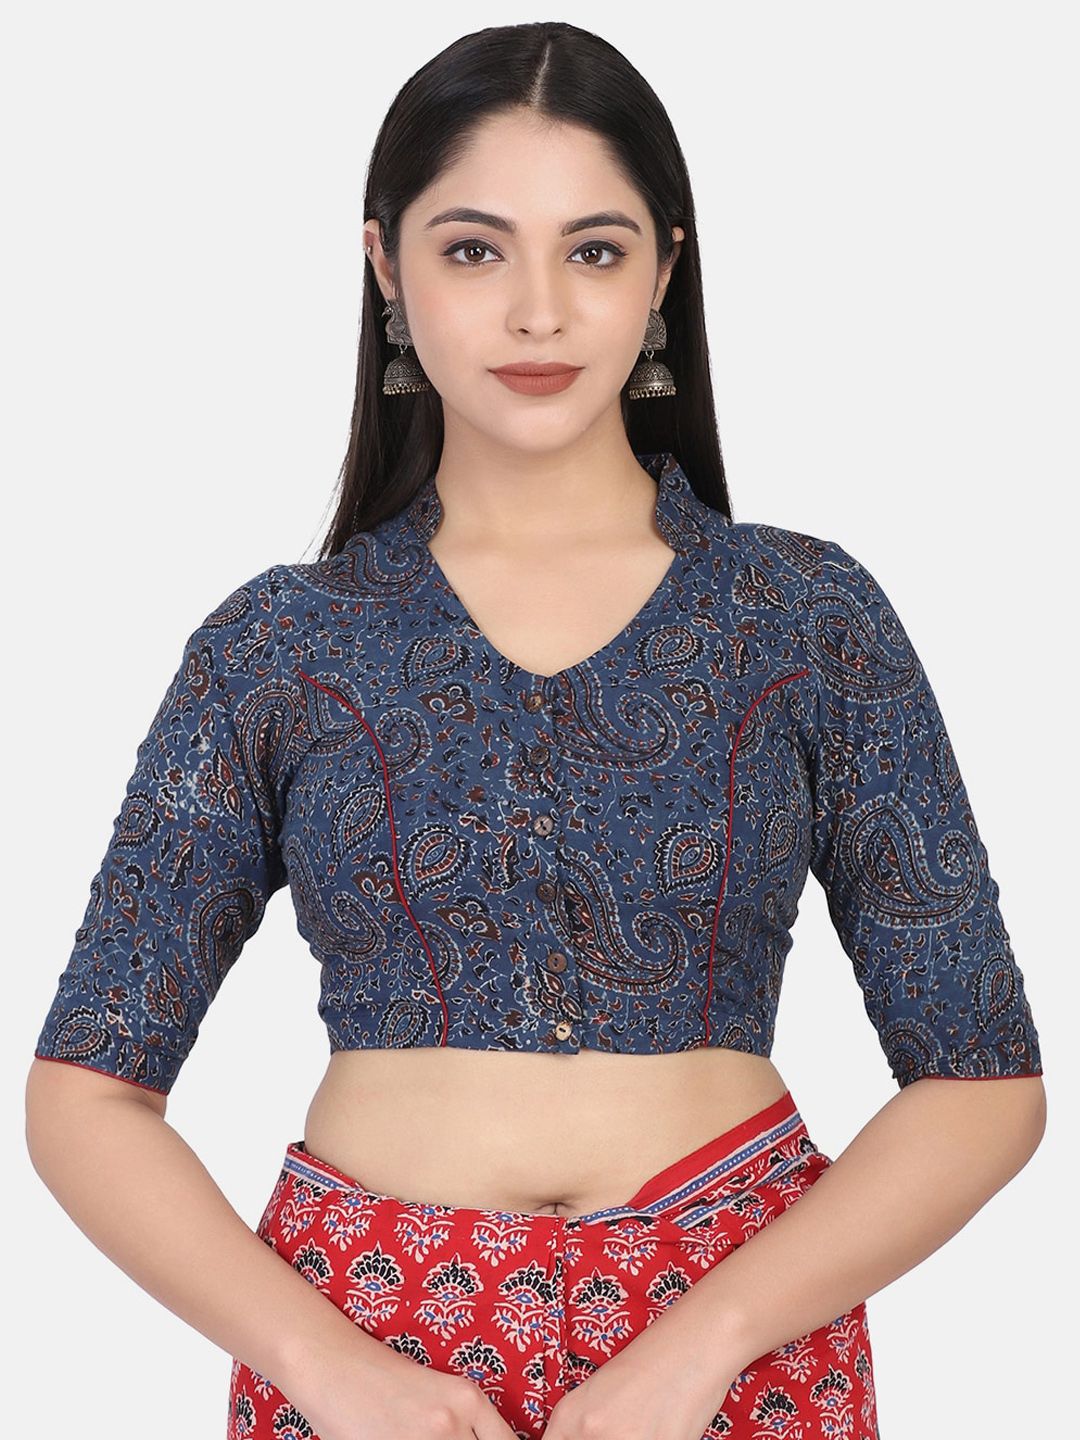 THE WEAVE TRAVELLER Blue & Maroon Hand Block Printed Cotton Saree Blouse Price in India